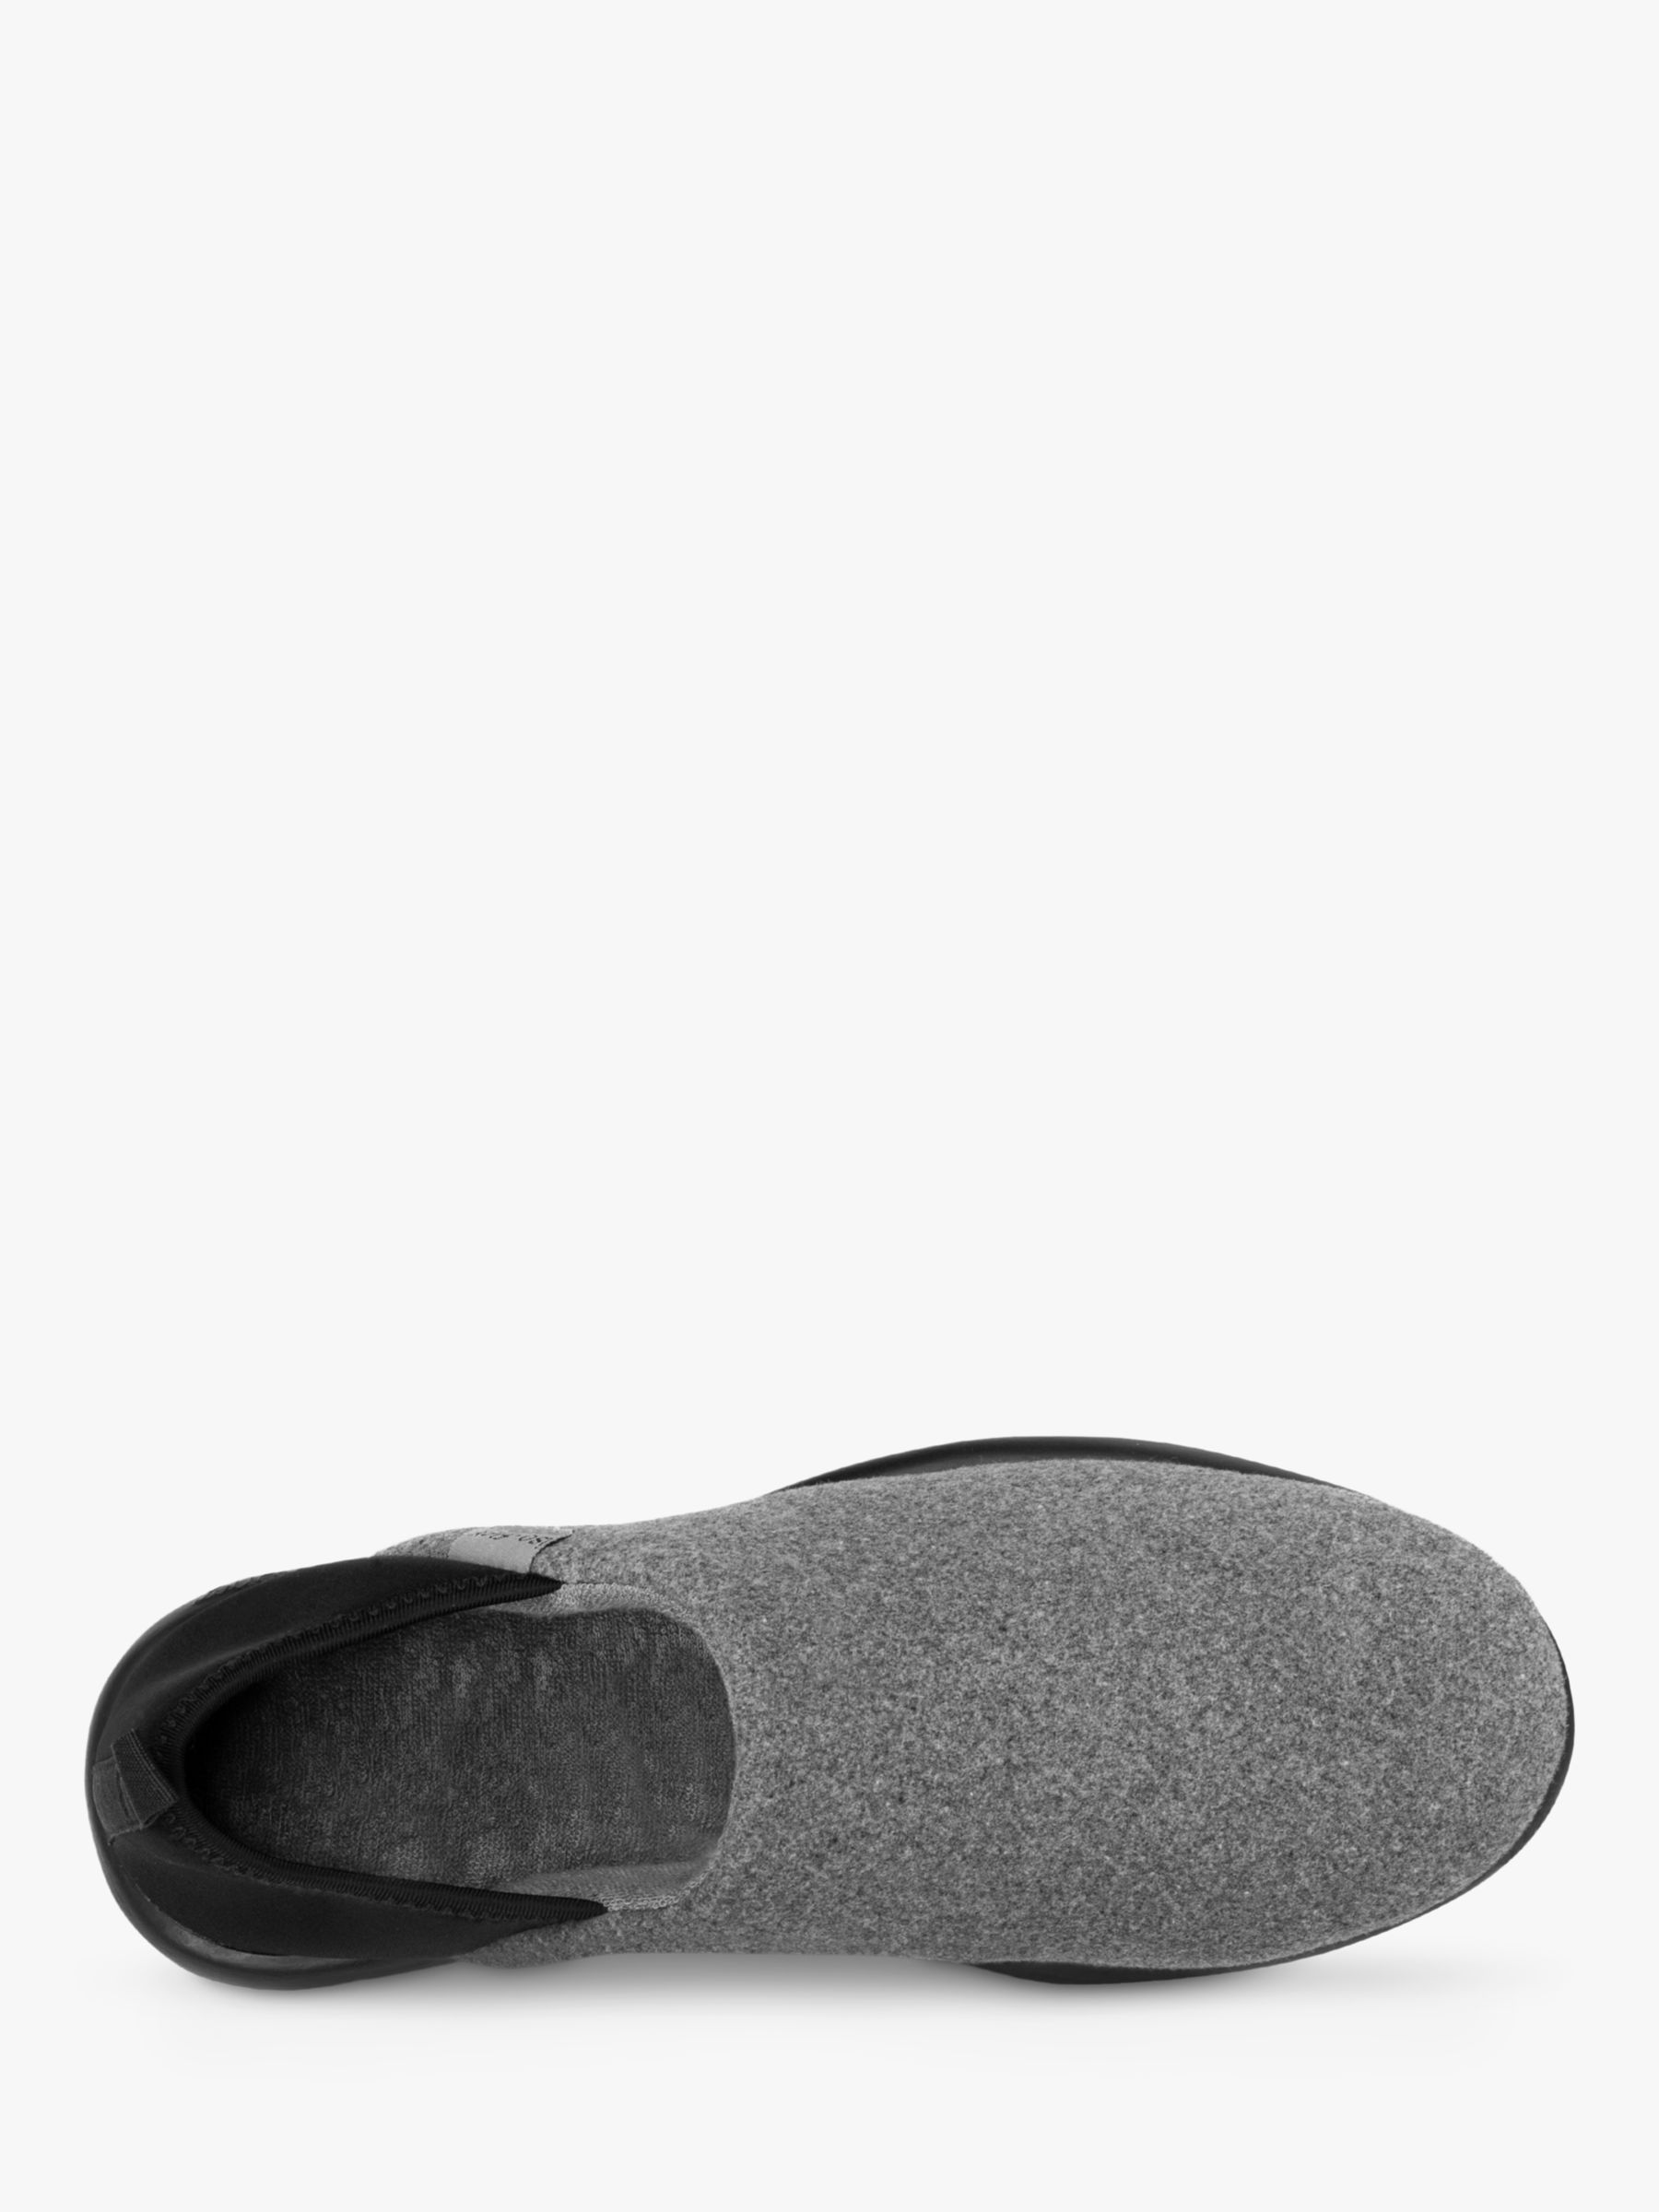 Buy totes Iso Flex Textured Colour Block Mule Slippers, Grey/Black Online at johnlewis.com